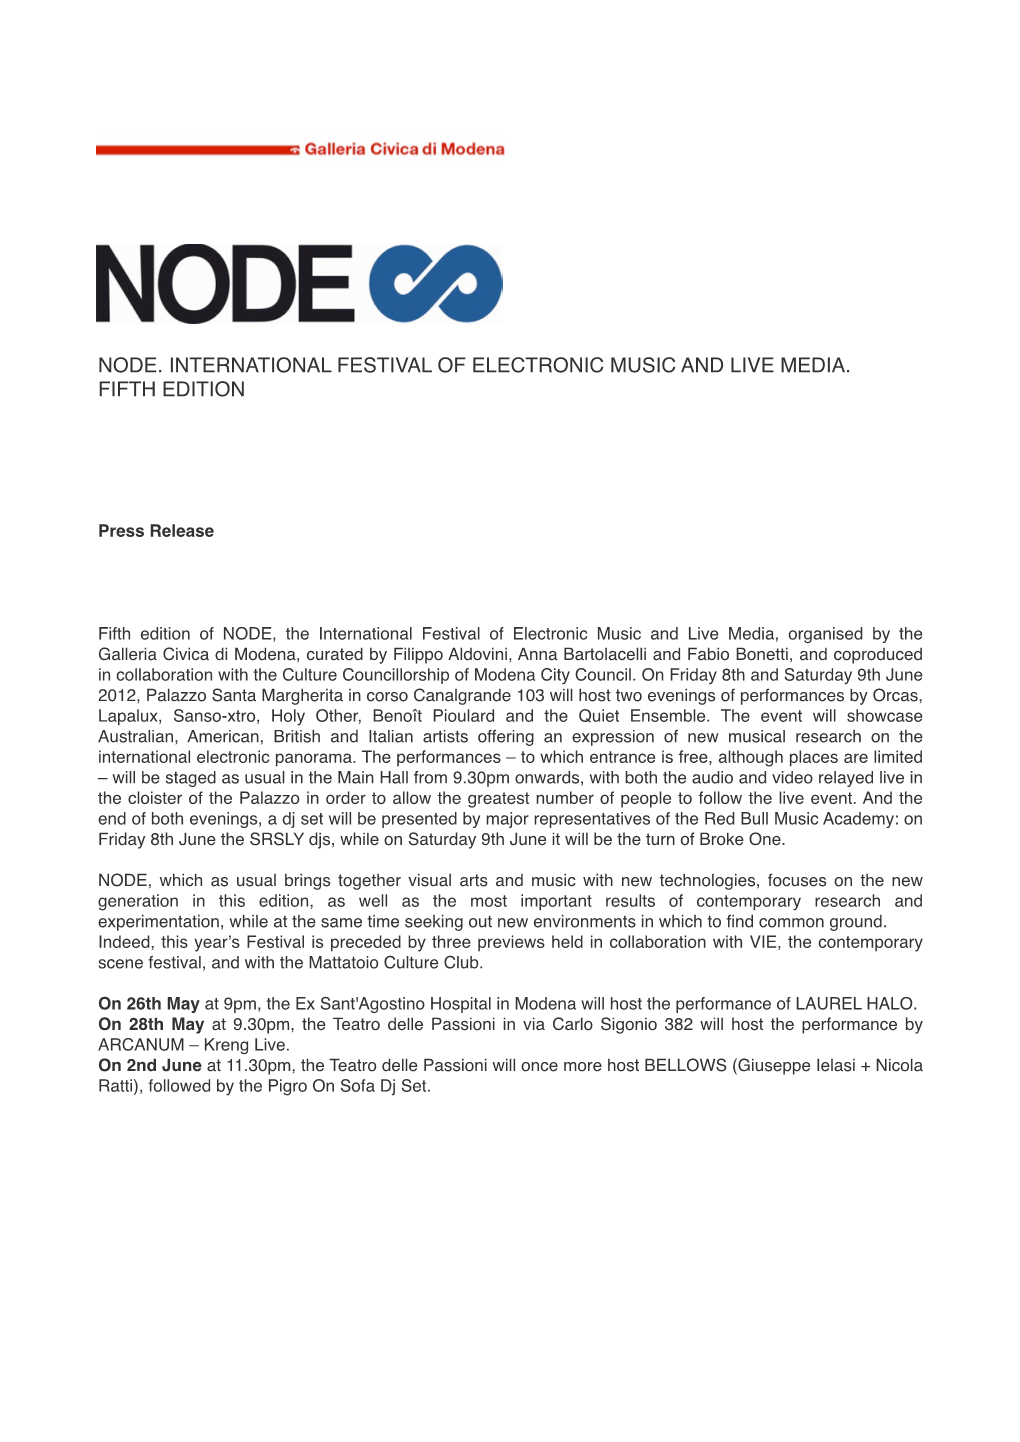 Node. International Festival of Electronic Music and Live Media